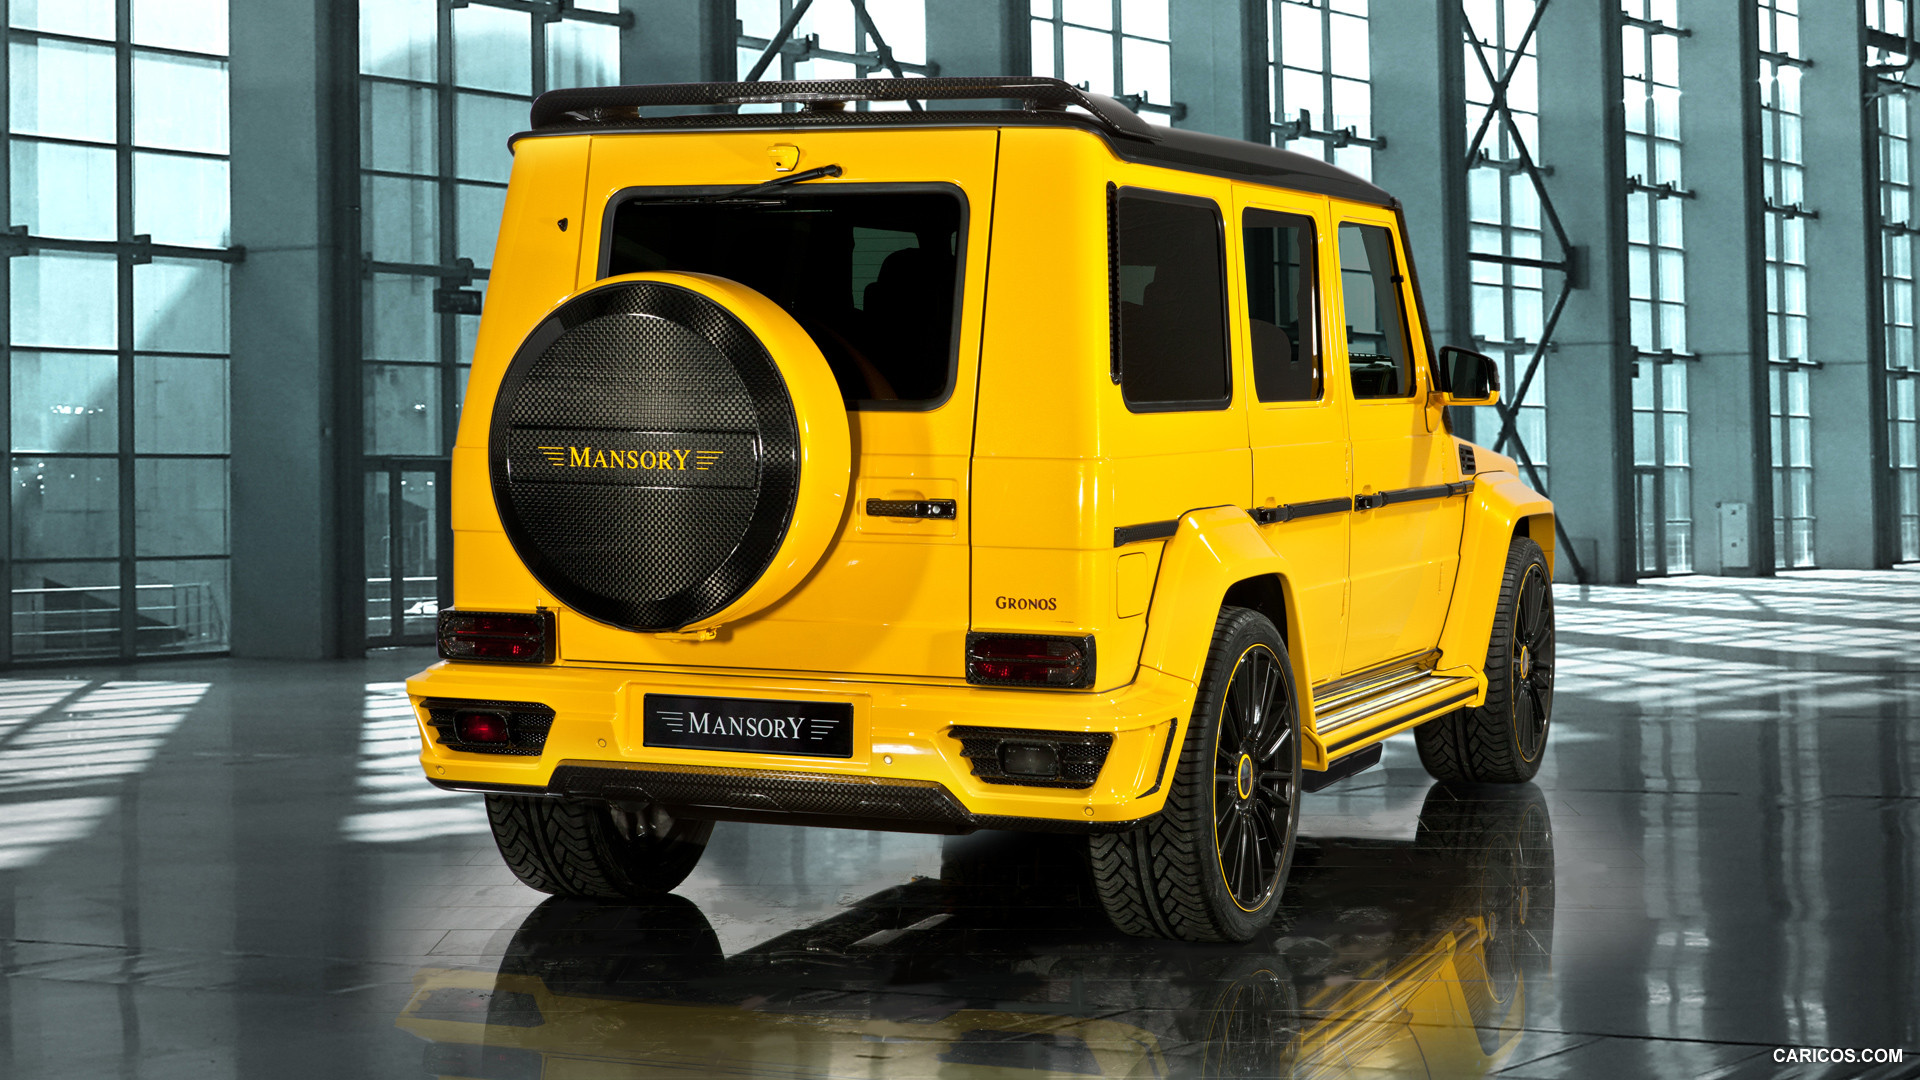 2013 Mansory Gronos based on Mercedes-Benz G-Class AMG  - Rear, #2 of 7